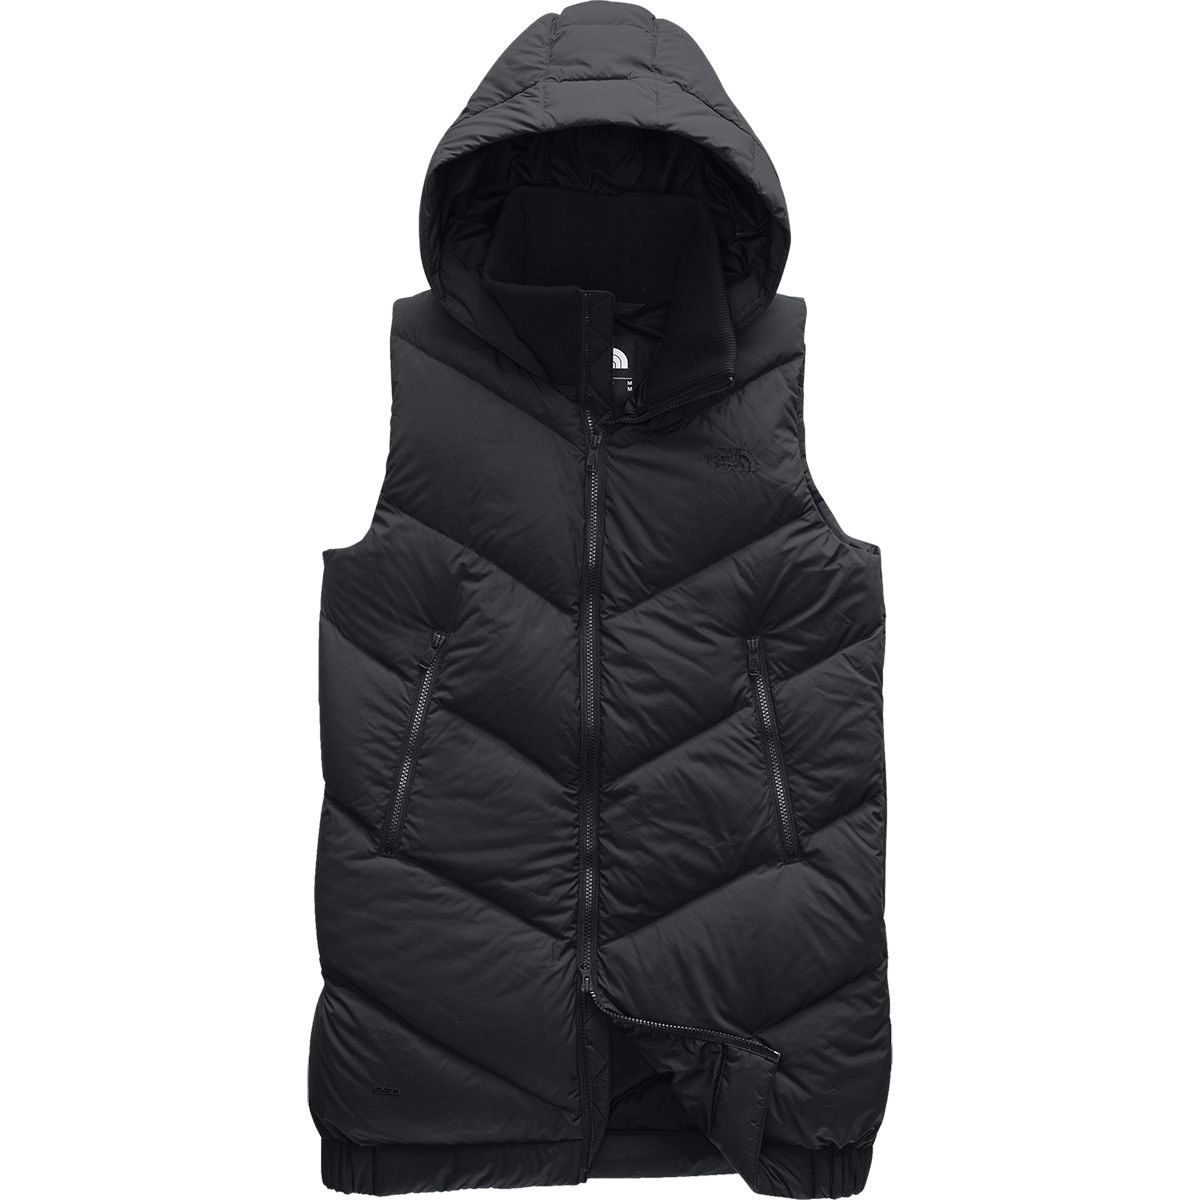 The North Face Albroz Insulated Vest - Women's | Backcountry.com